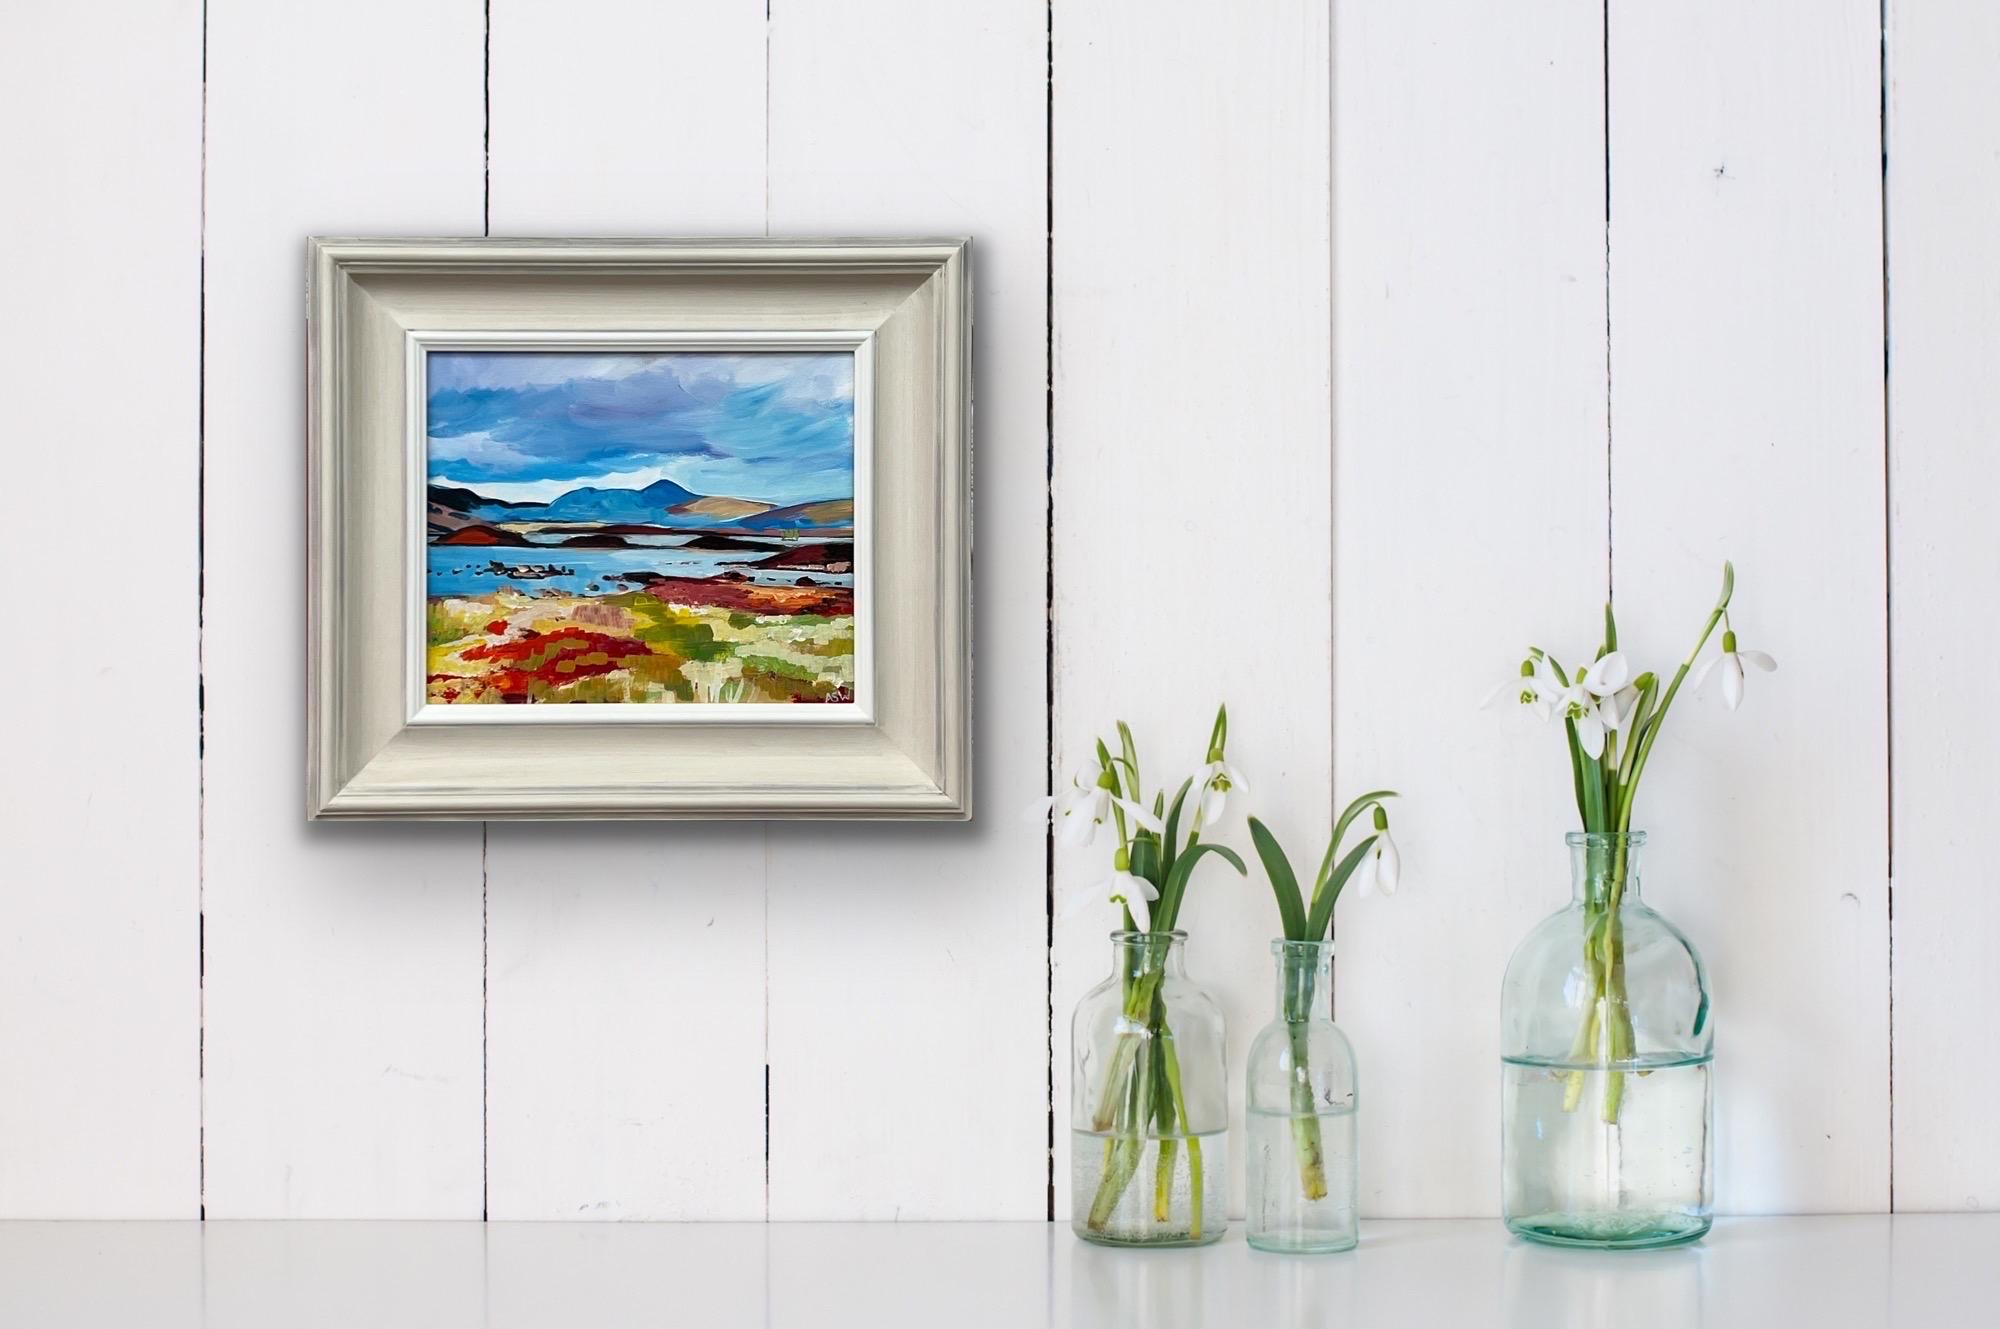 Colourful Landscape Painting of Loch Leven, Glen Coe in the Scottish Highlands by Leading Contemporary British Artist, Angela Wakefield. 

Art measures 12 x 10 inches 
Frame measures 18 x 16 inches 

Angela Wakefield has twice been on the front